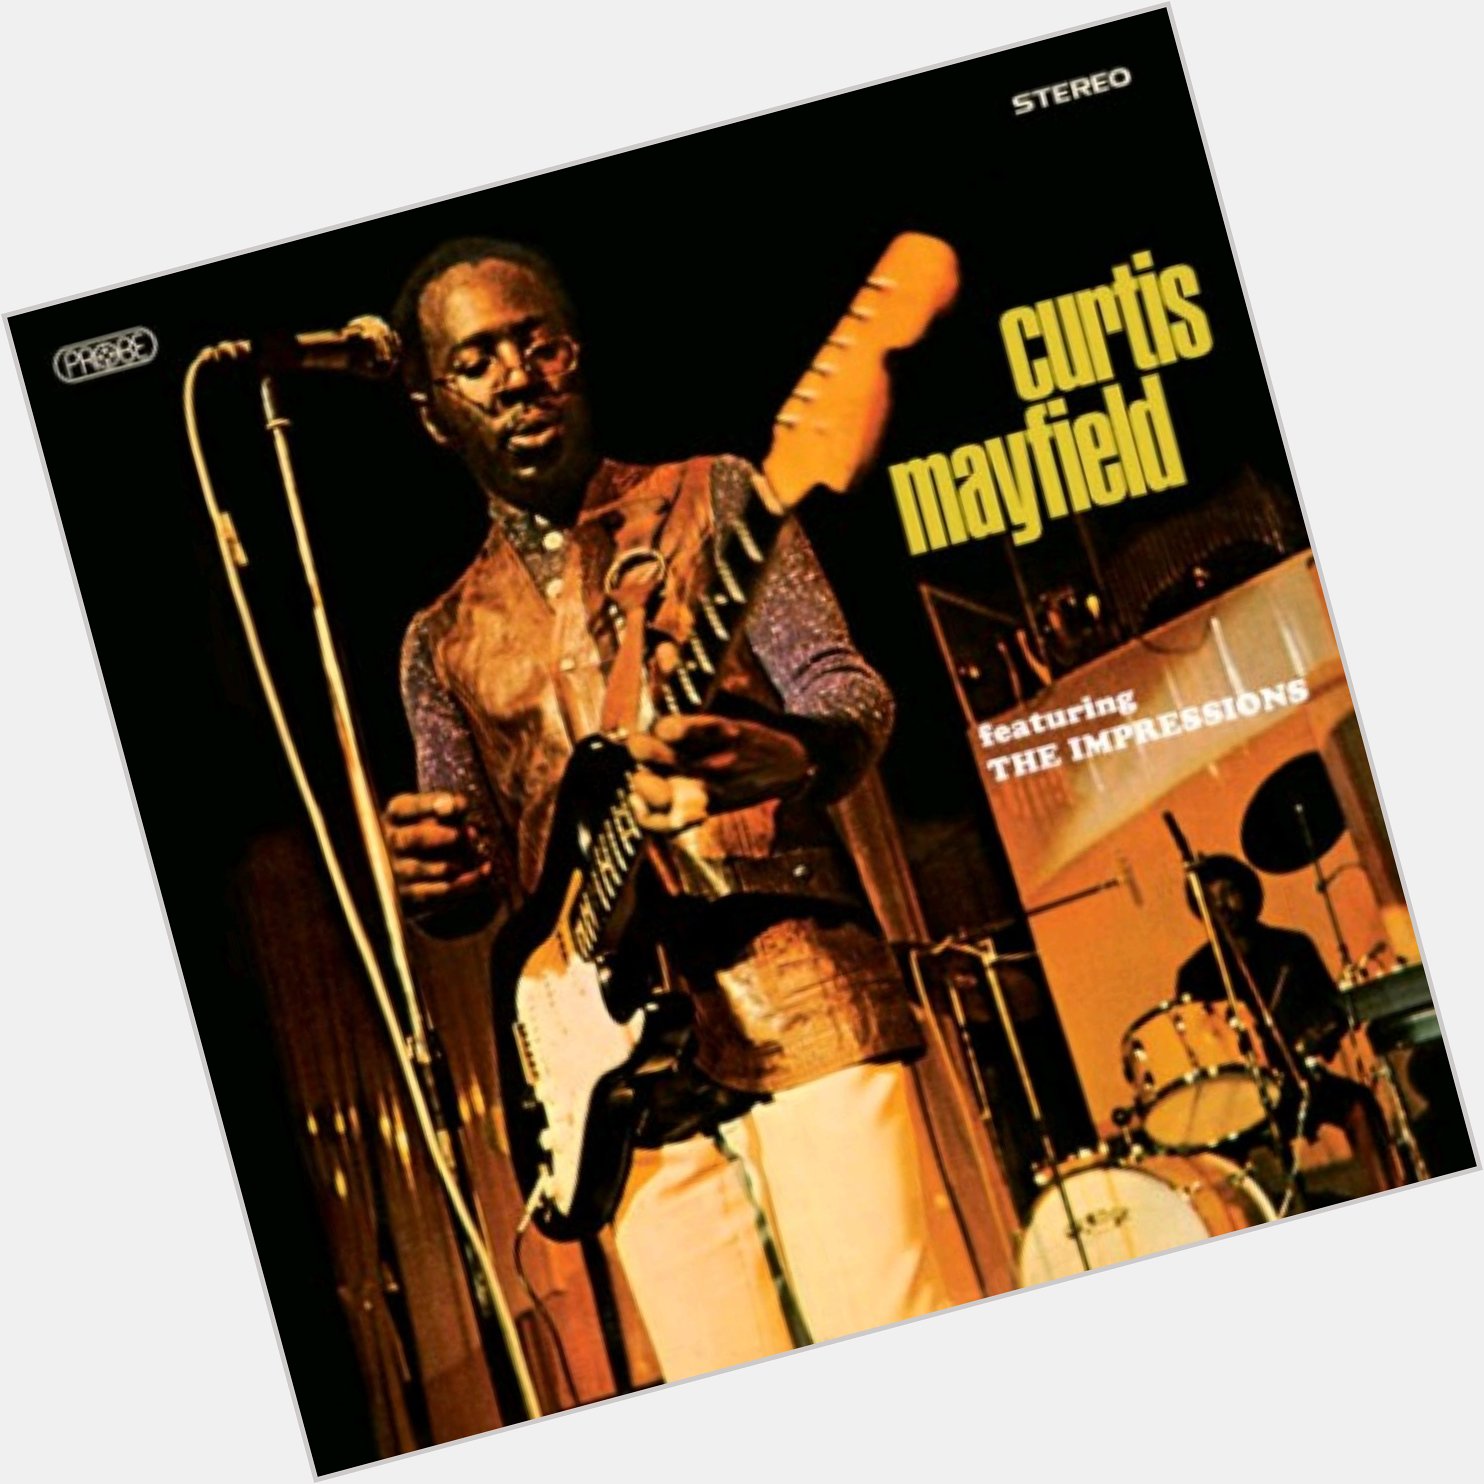 HAPPY HEAVENLY BIRTHDAY CURTIS MAYFIELD JUNE 3RD 1942 - DECEMBER 26TH 1999. 